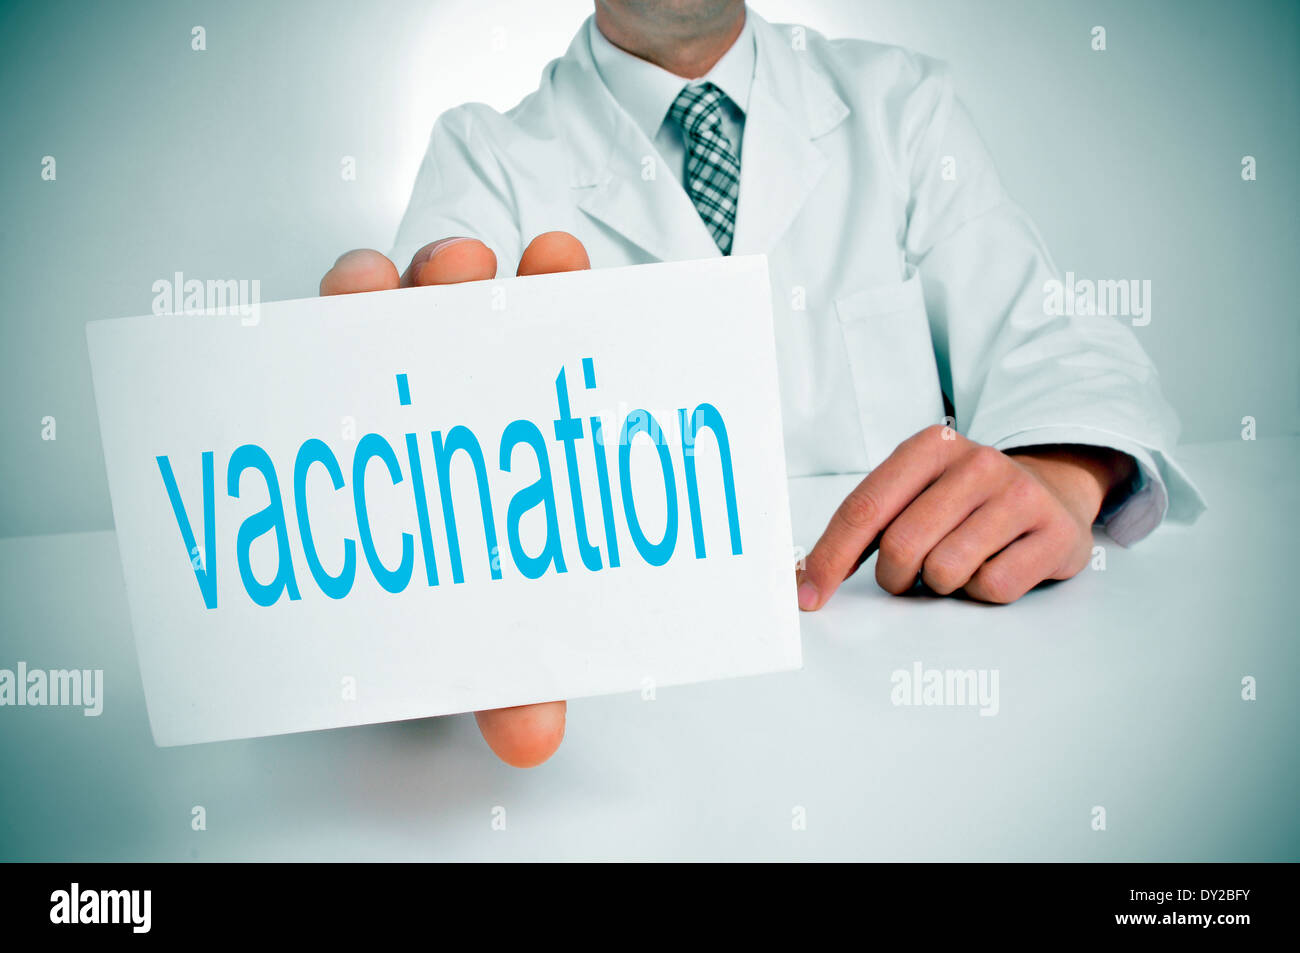 a man wearing a white coat showing sitting in a desk a signboard with the word vaccination written in it Stock Photo